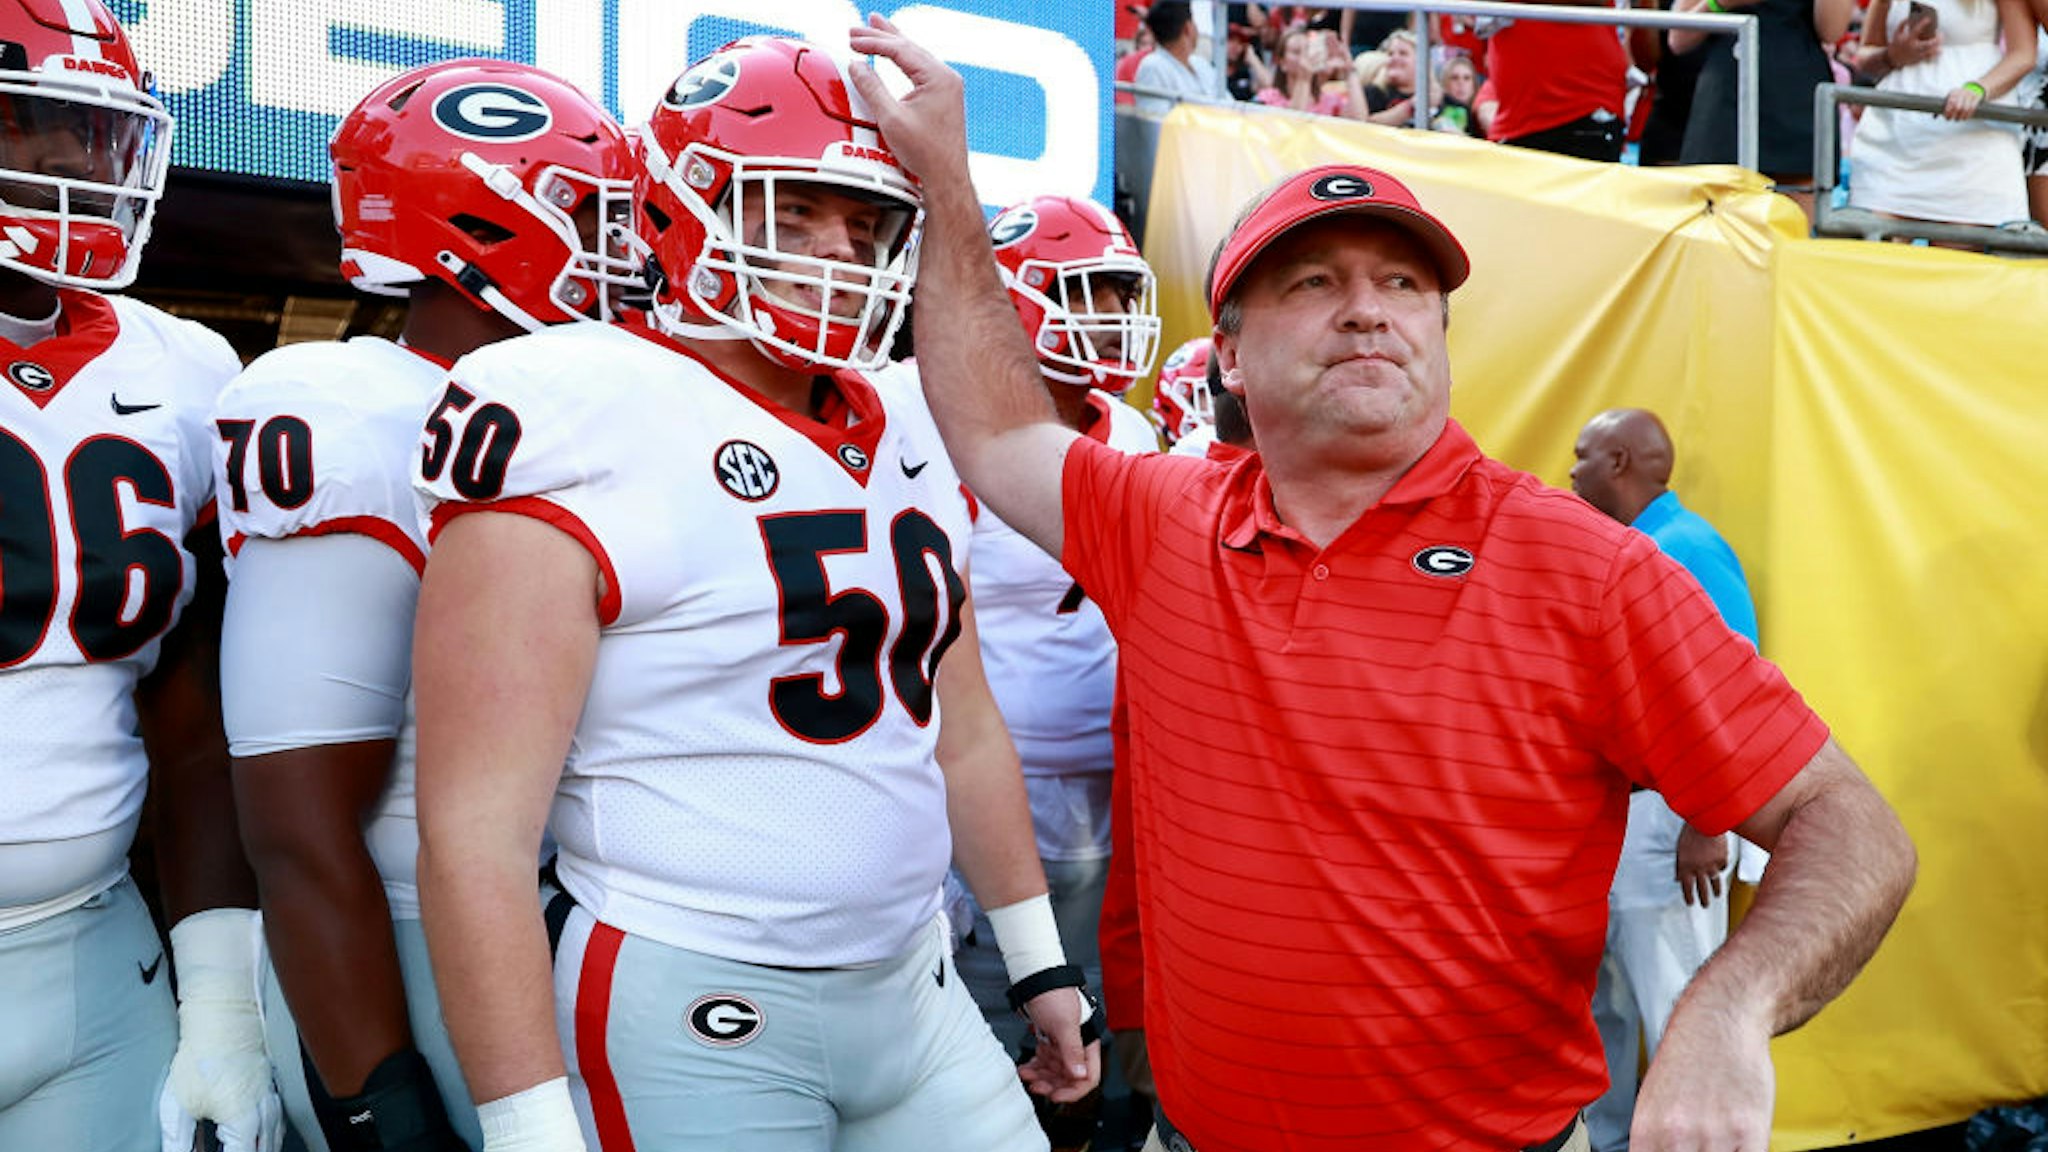 CHARLOTTE, NORTH CAROLINA - SEPTEMBER 04: Head coach Kirby Smart of the Georgia Bulldogs leads his team onto the field before their game against the Clemson Tigers in the Duke's Mayo Classic at Bank of America Stadium on September 04, 2021 in Charlotte, North Carolina. (Photo by Grant Halverson/Getty Images)